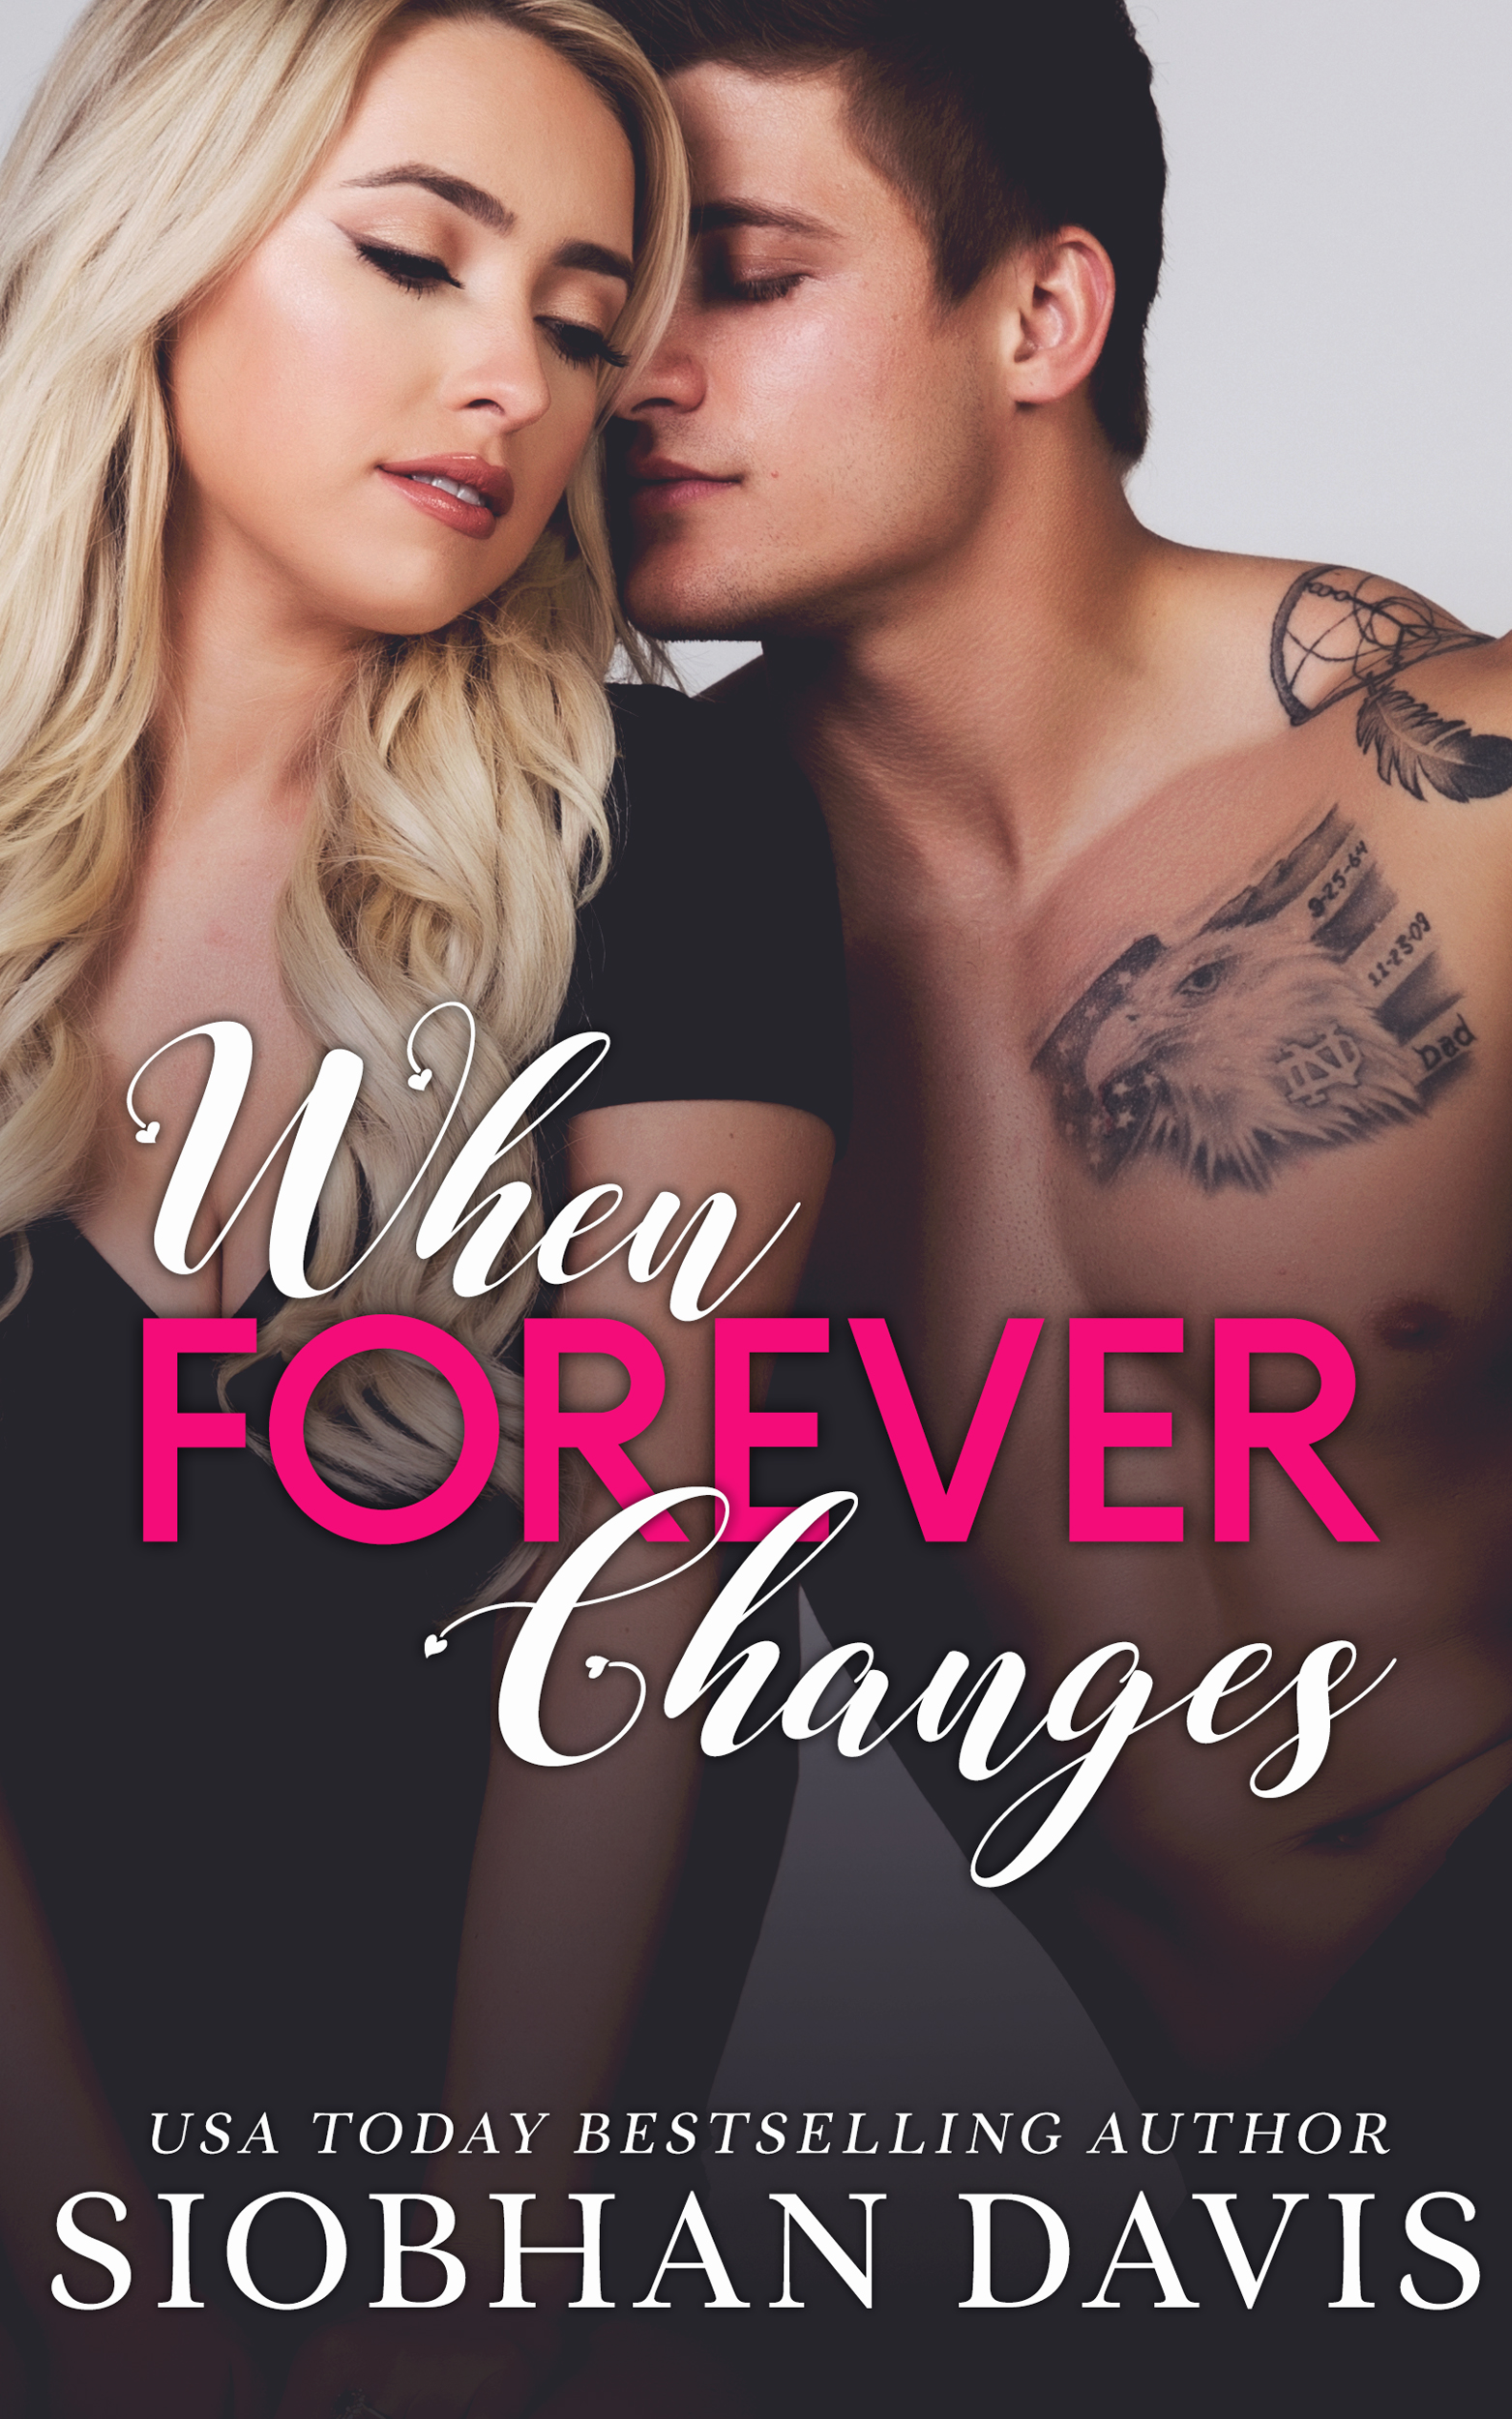 When Forever Changes by Siobhan Davis [Release Blitz]